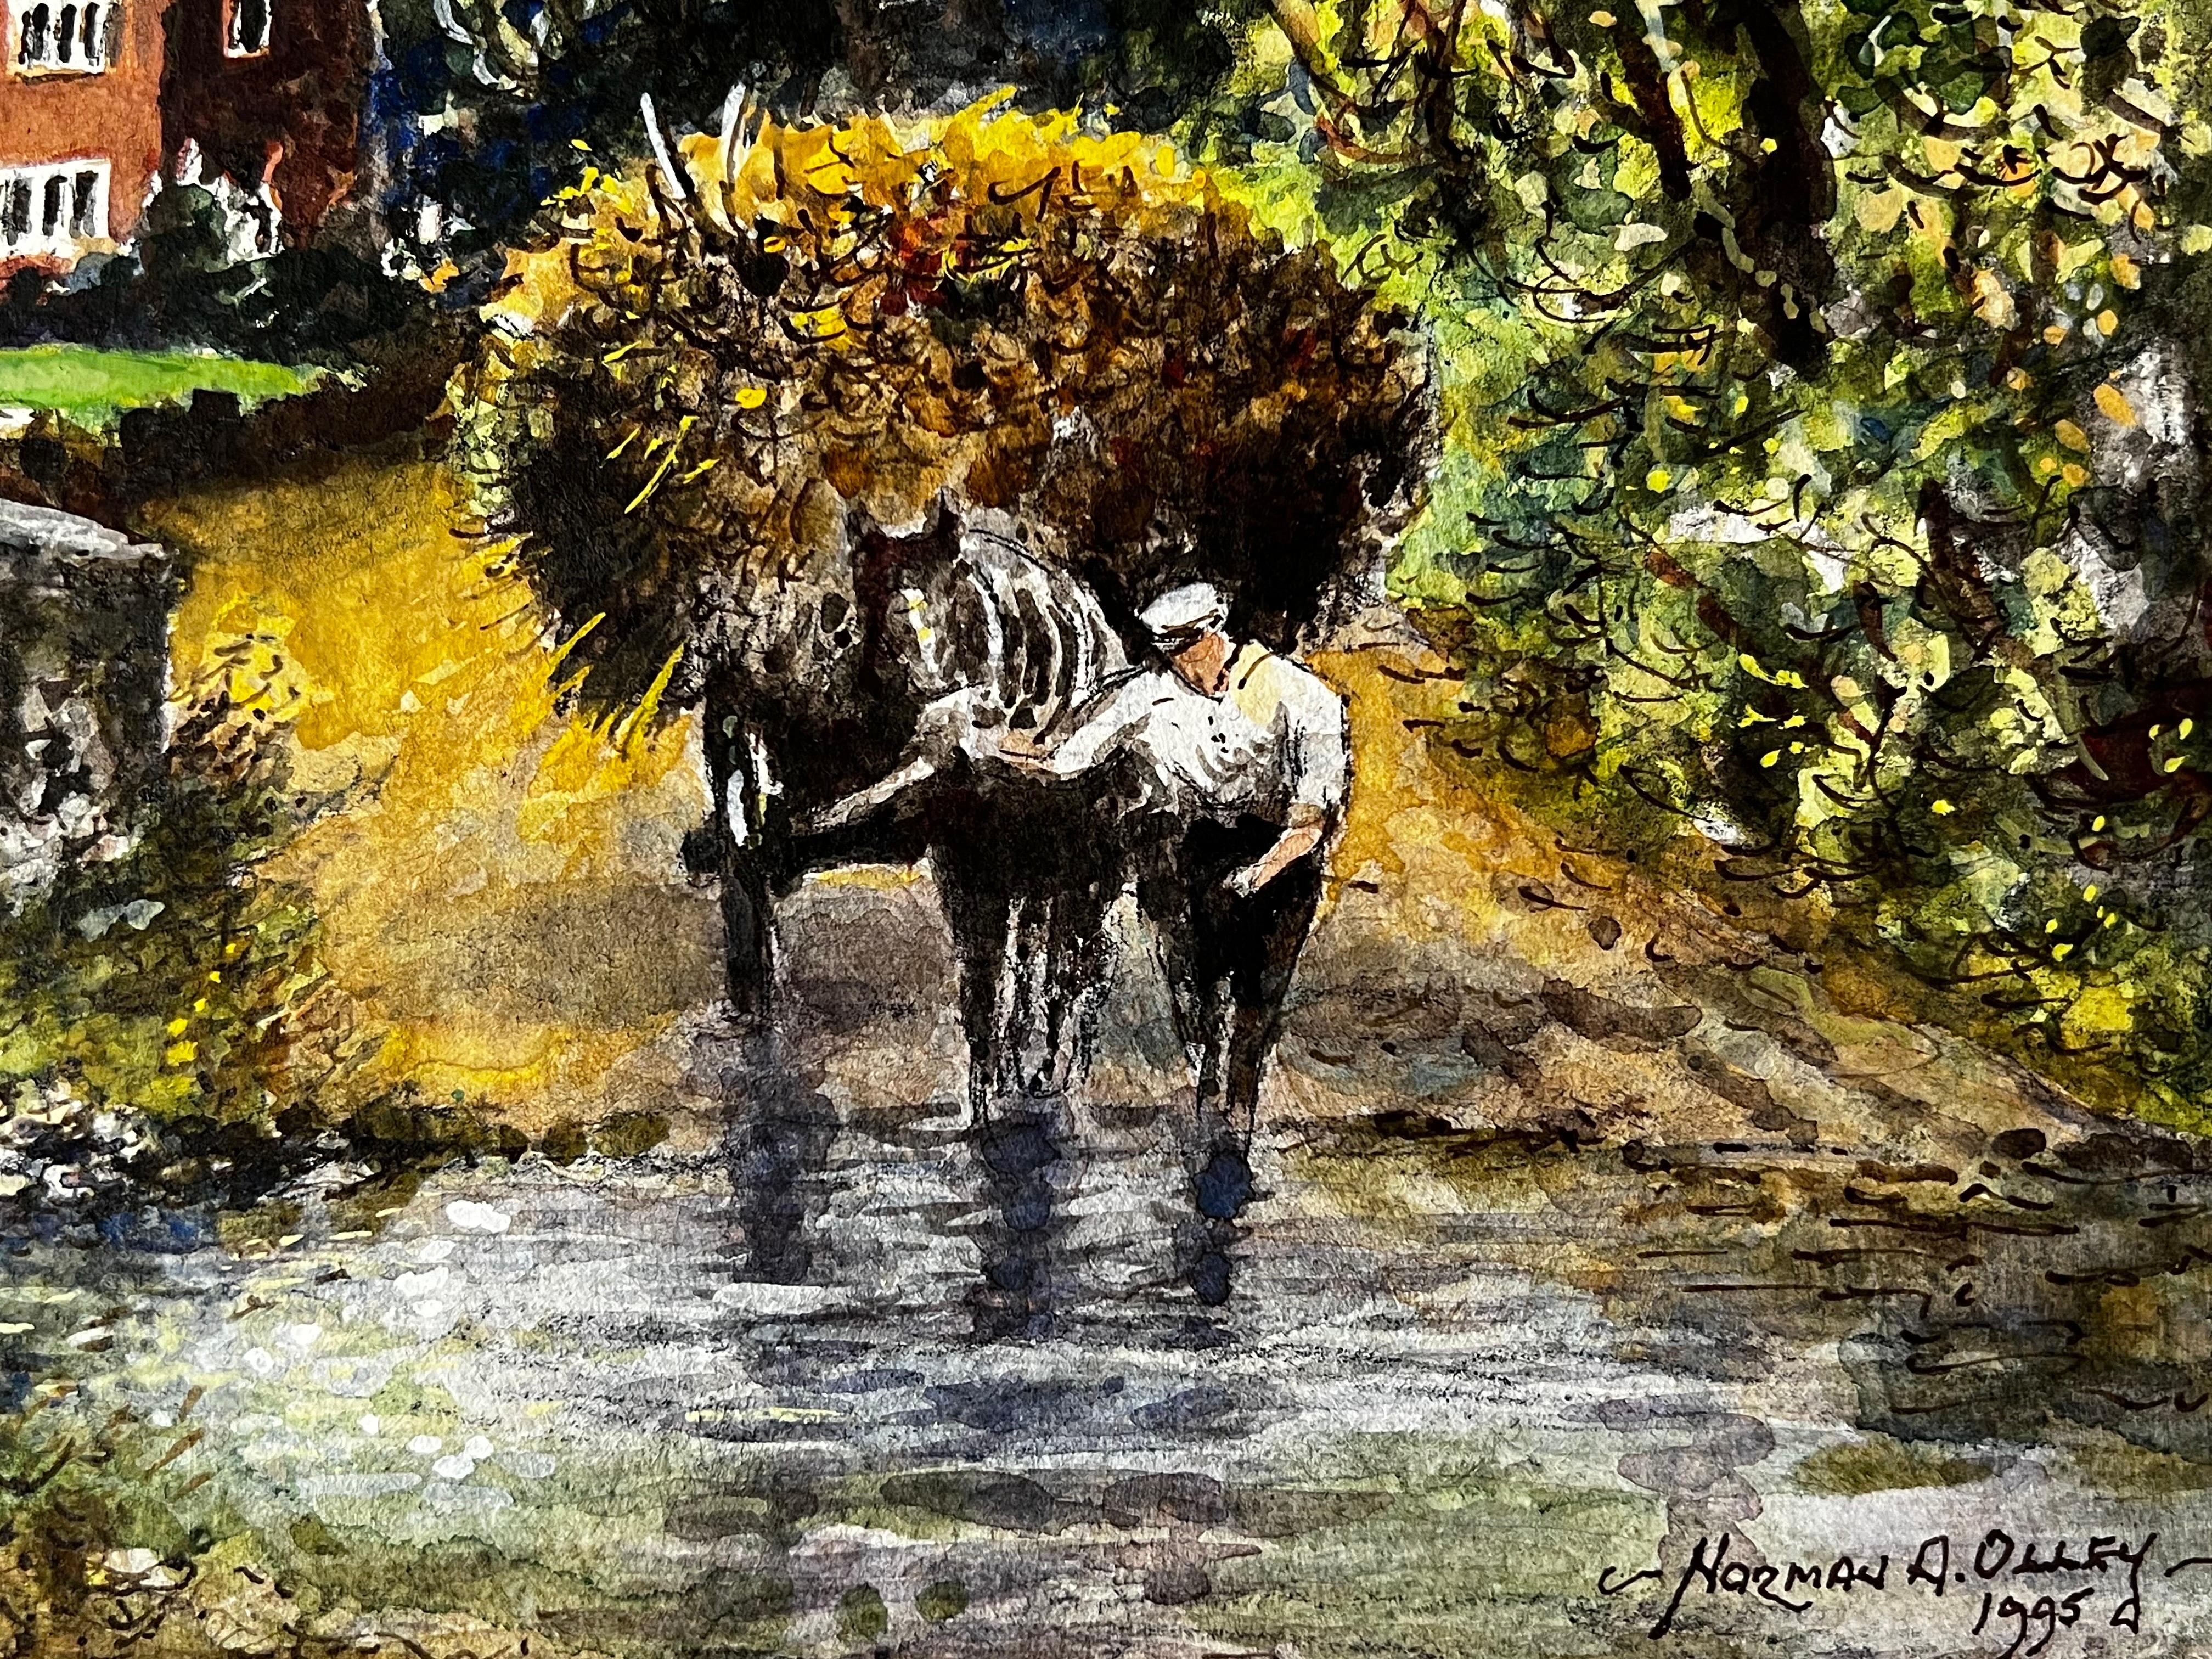 Artist/ School: Norman A.Olley ( British, 20th Century) dated 1995 and inscribed verso

Title - Haycart At The Ford Of The Old Packhorse Bridge

Medium: gouache/watercolour/ ink/ pencil on artist paper, unframed 

Painting : 9.5 x 12.5